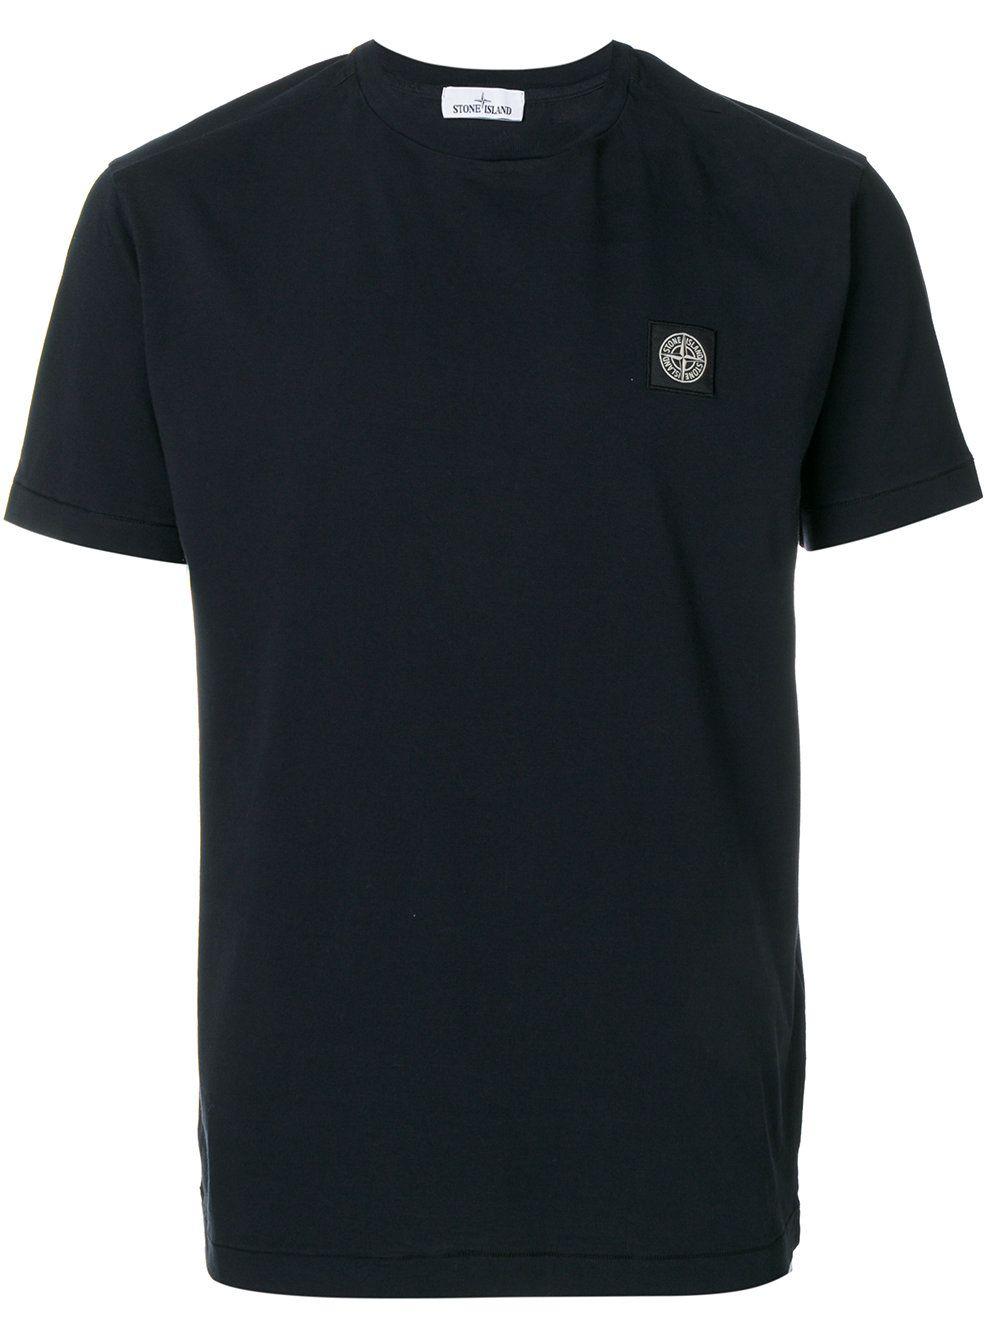 Leading Clothing and Accessories Retailer Logo - Stone Island logo patch T-shirt BLUE Men online leading retailer ...